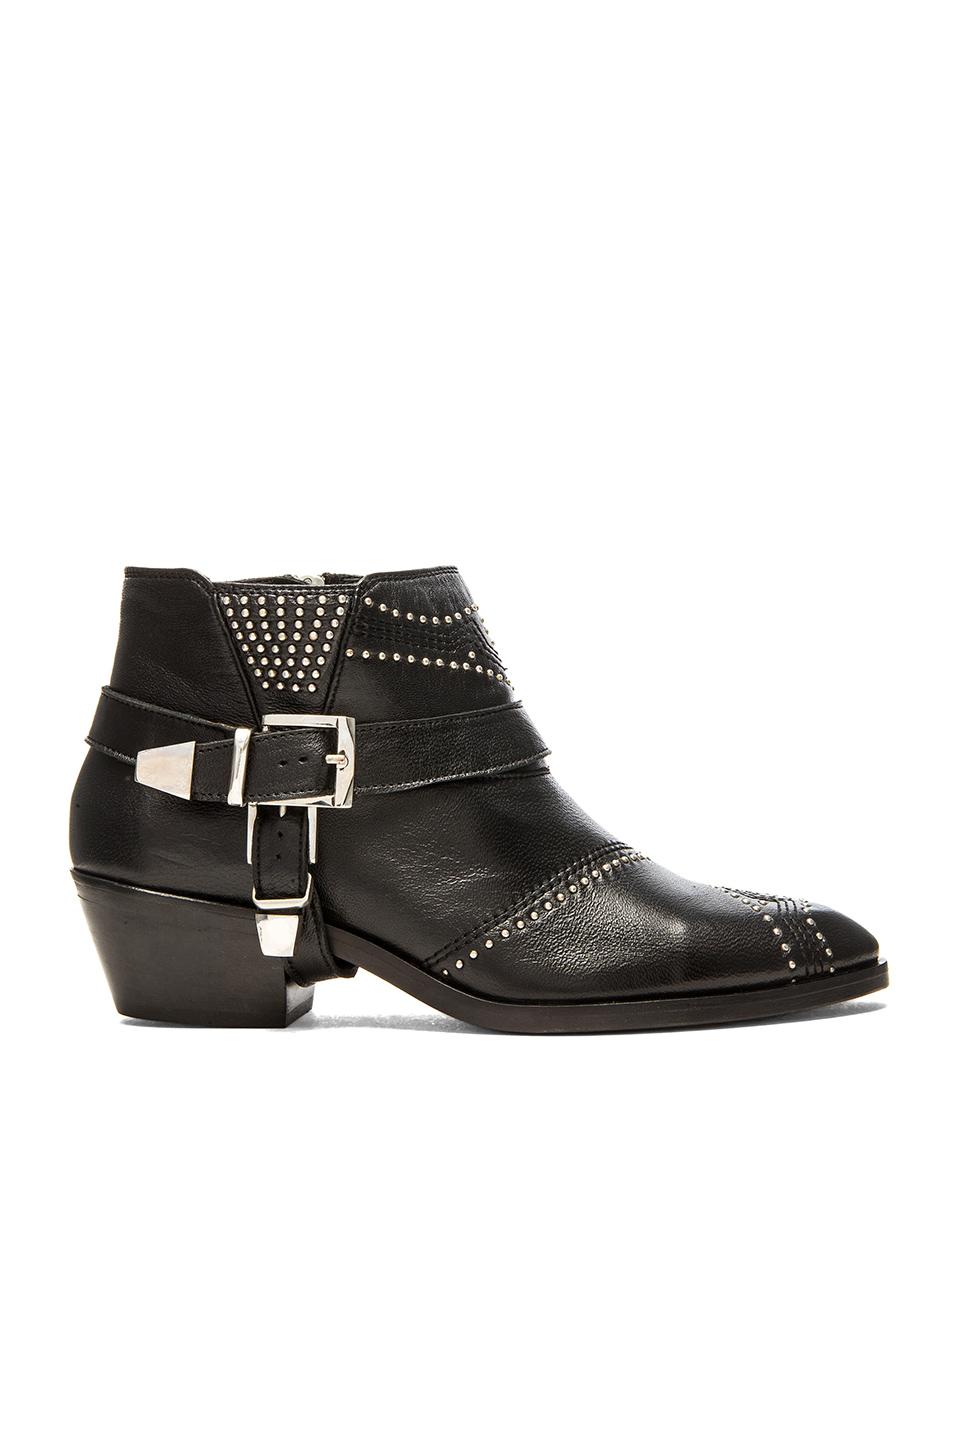 Anine Bing Studded Boots With Buckles in Natural - Lyst